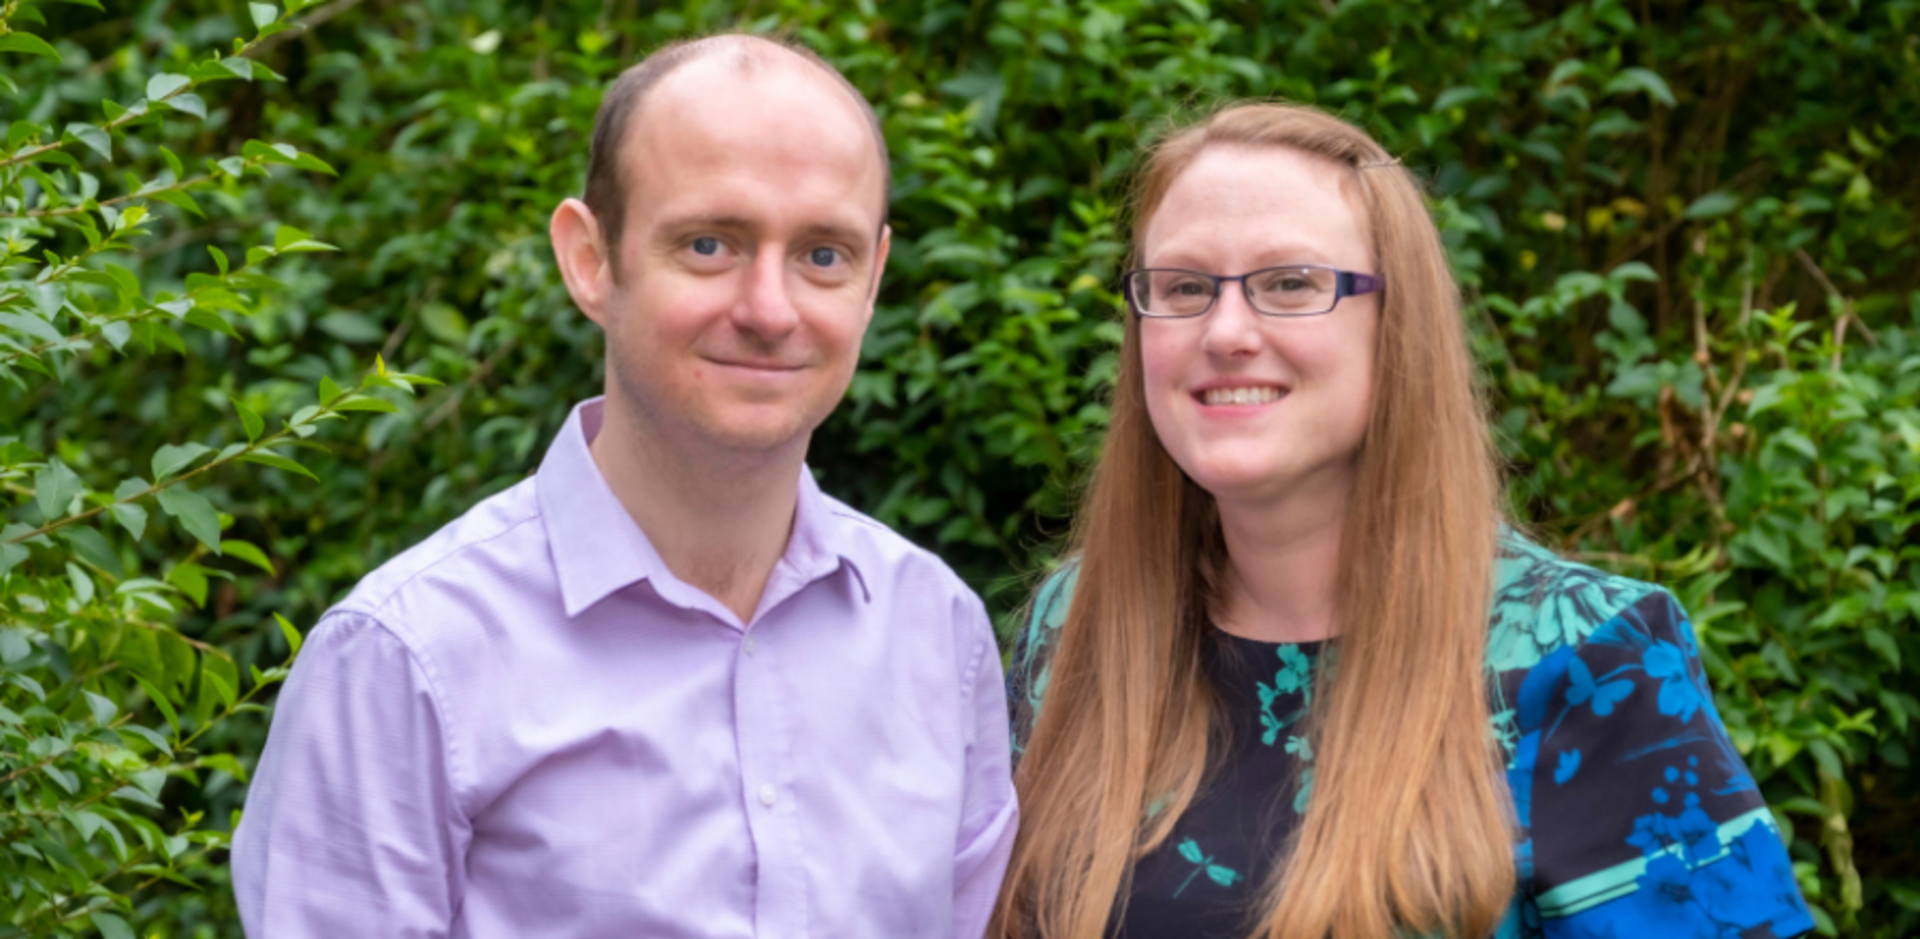 Researchers Dr Chris Hand and Dr Joanne Ingram